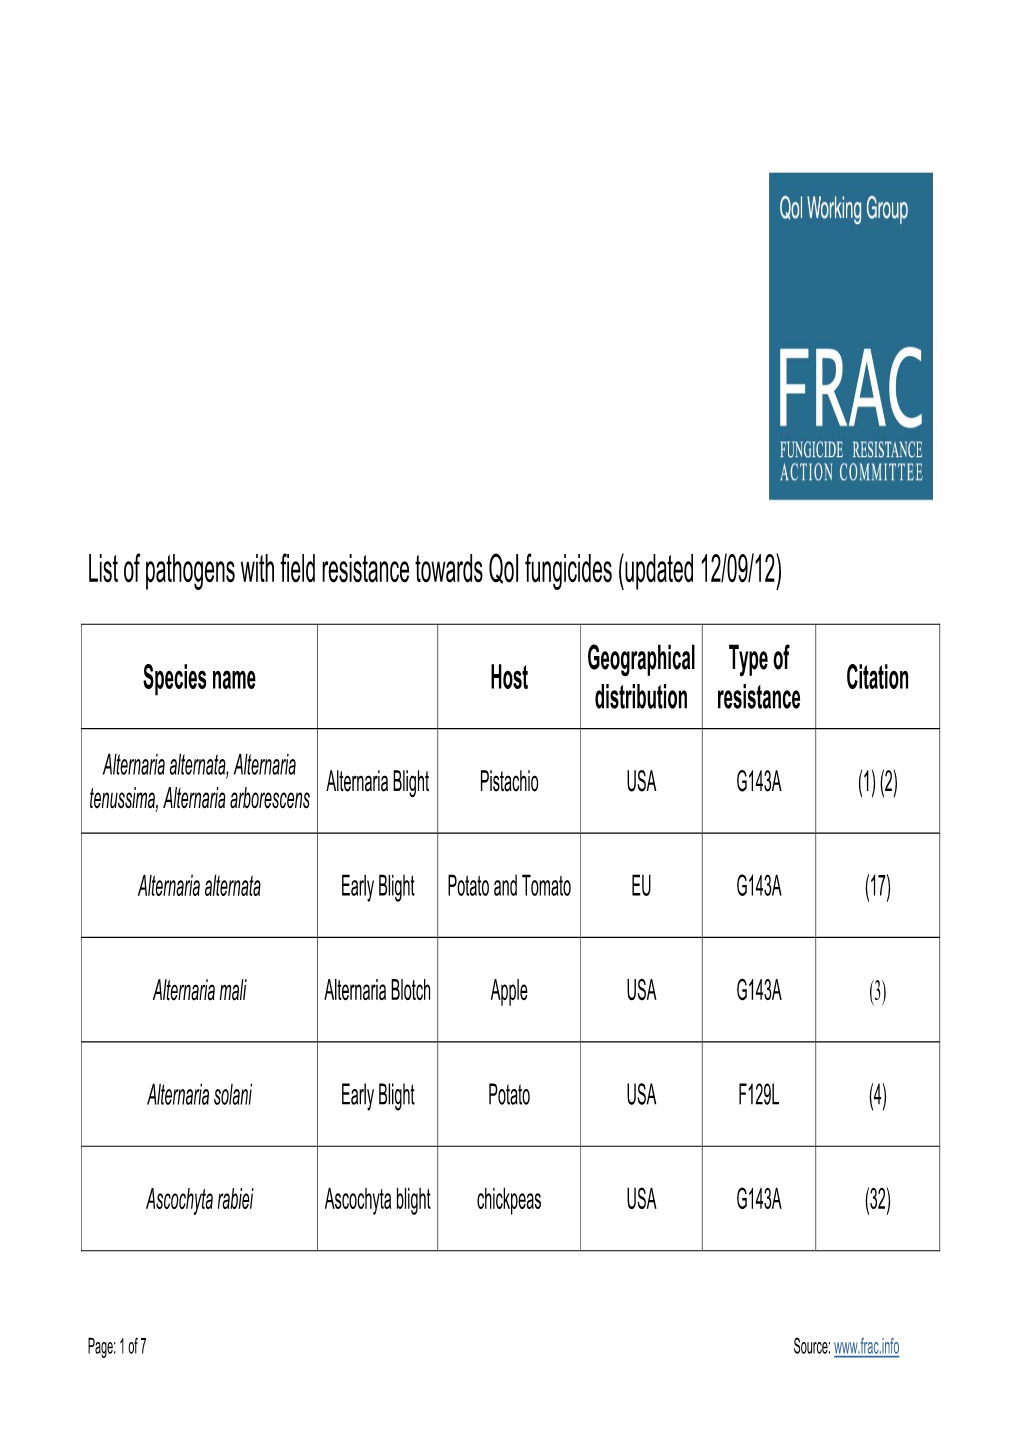 List of Pathogens with Field Resistance Towards Qoi Fungicides (Updated 12/09/12)